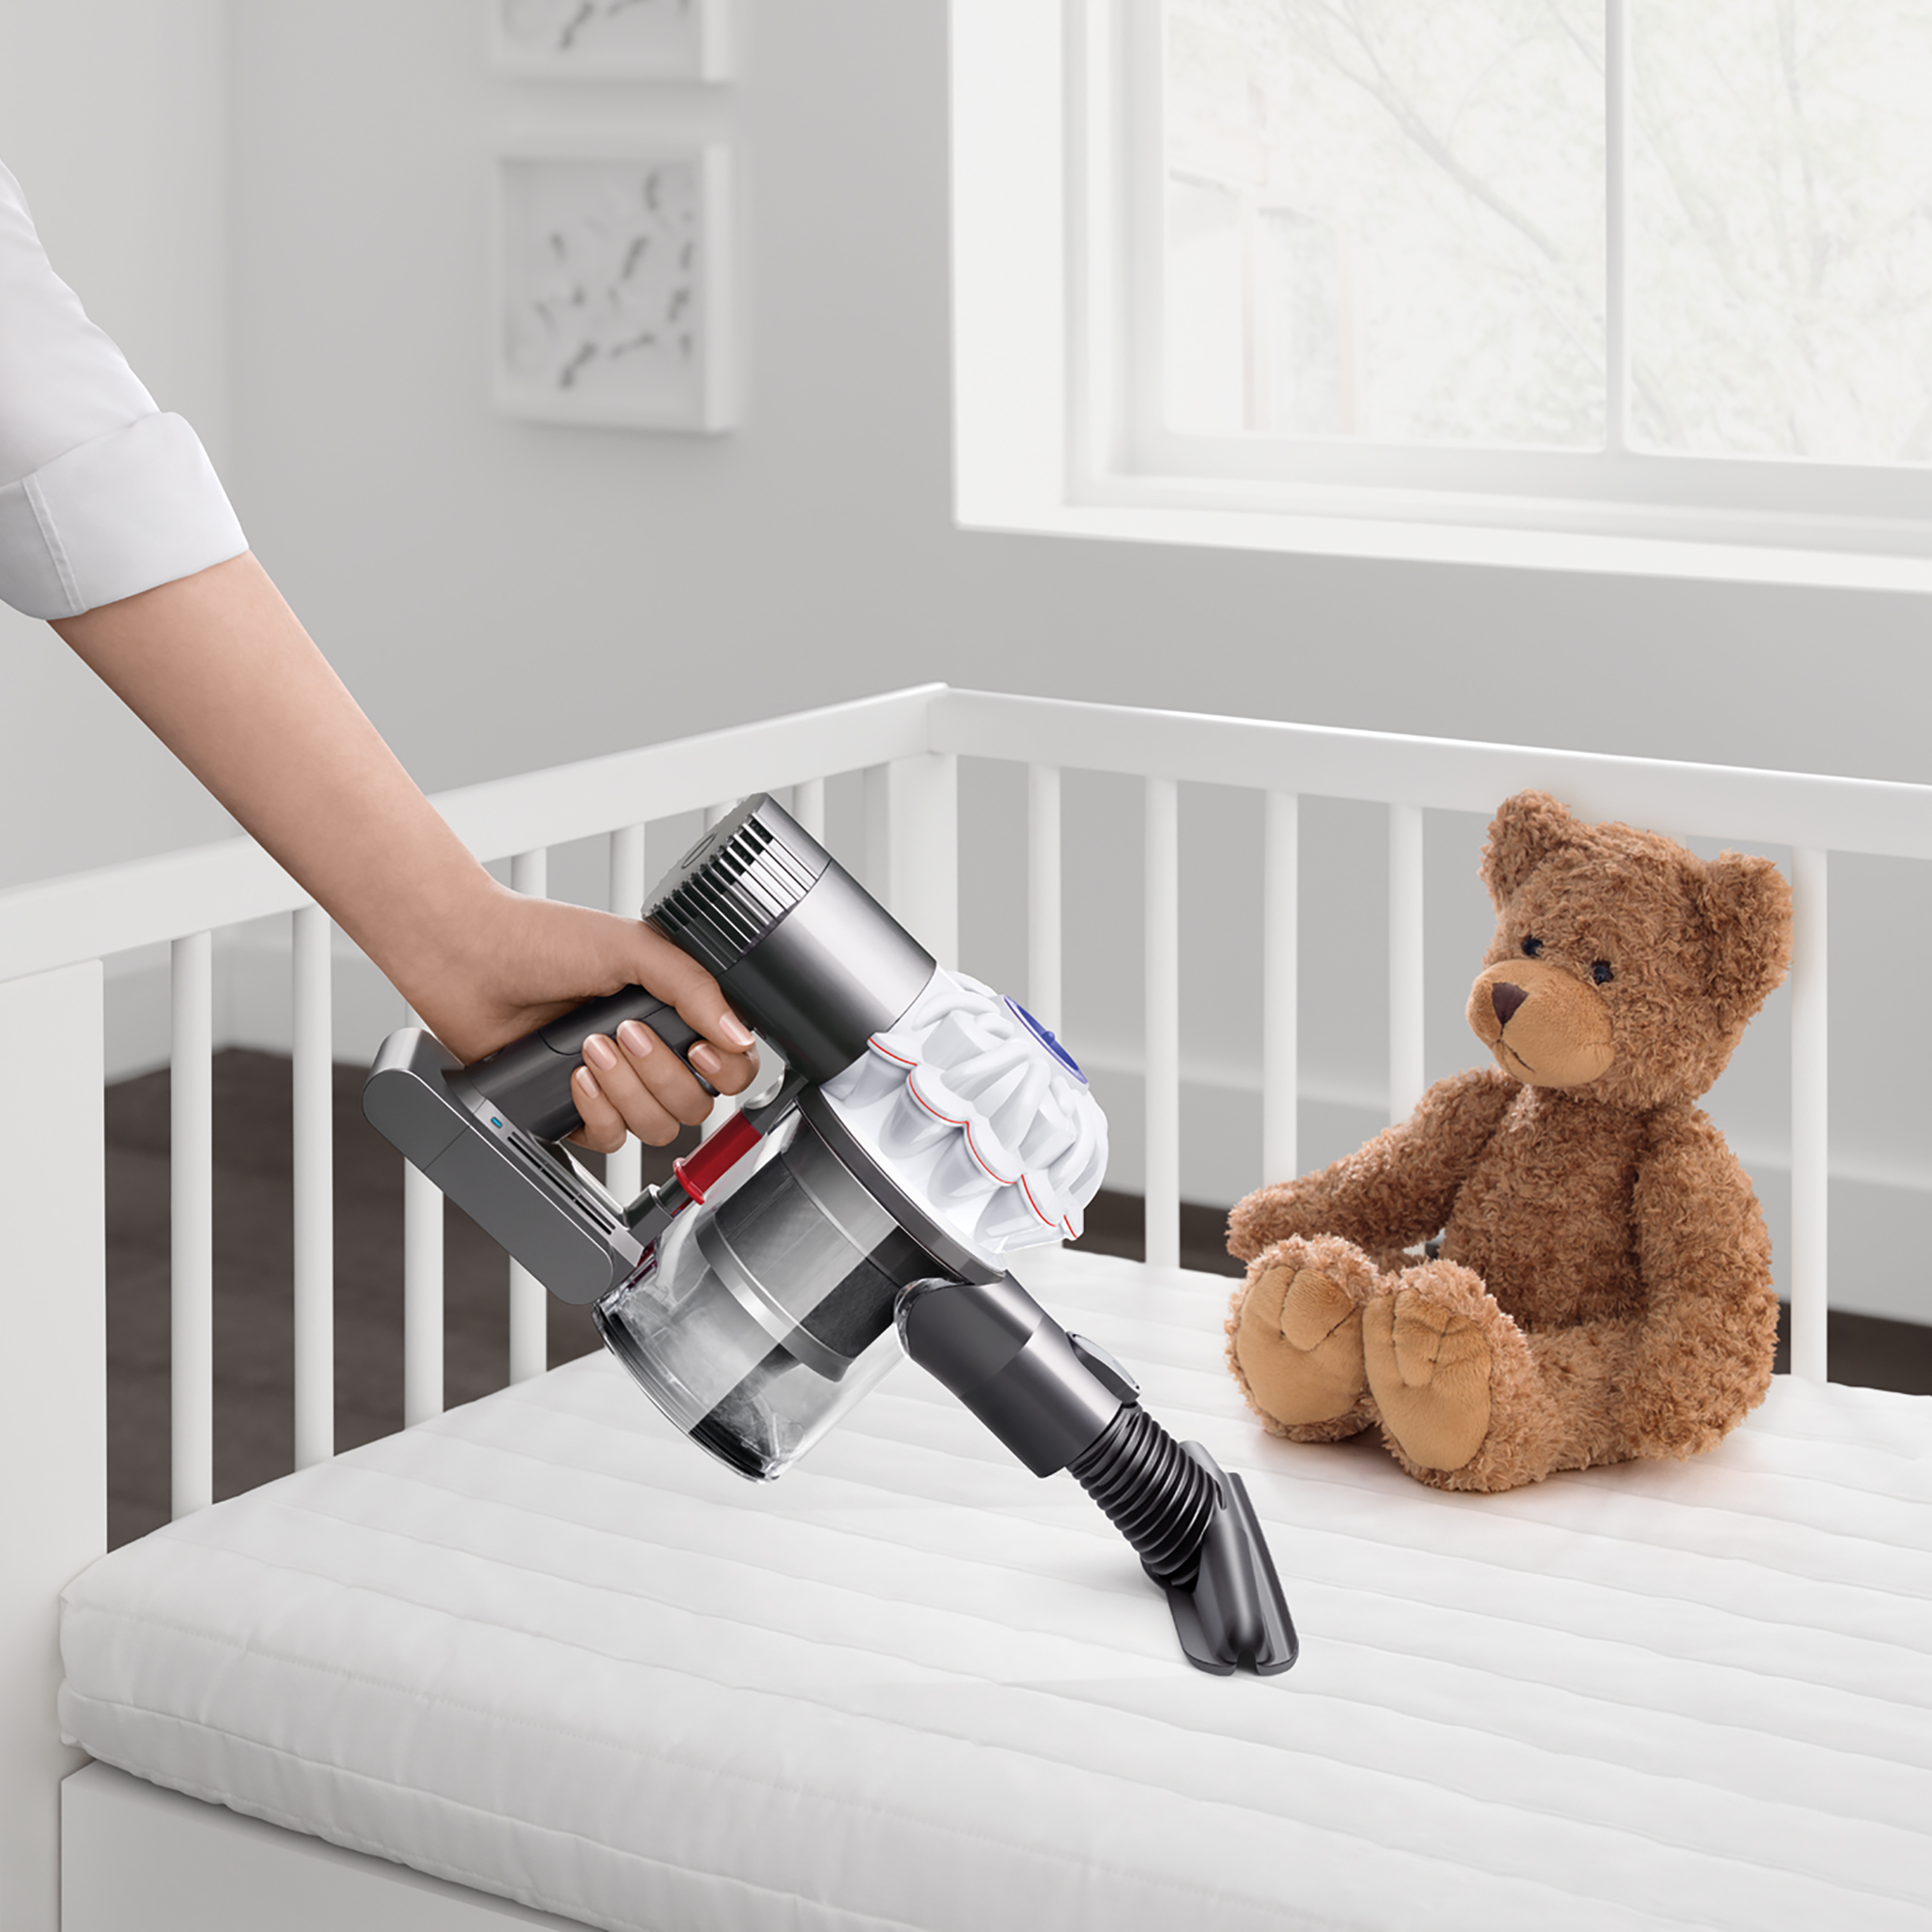 Dyson V6 Trigger Handheld Vacuum with Combination Tools (V6 Trigger Baby + Child) - image 2 of 6